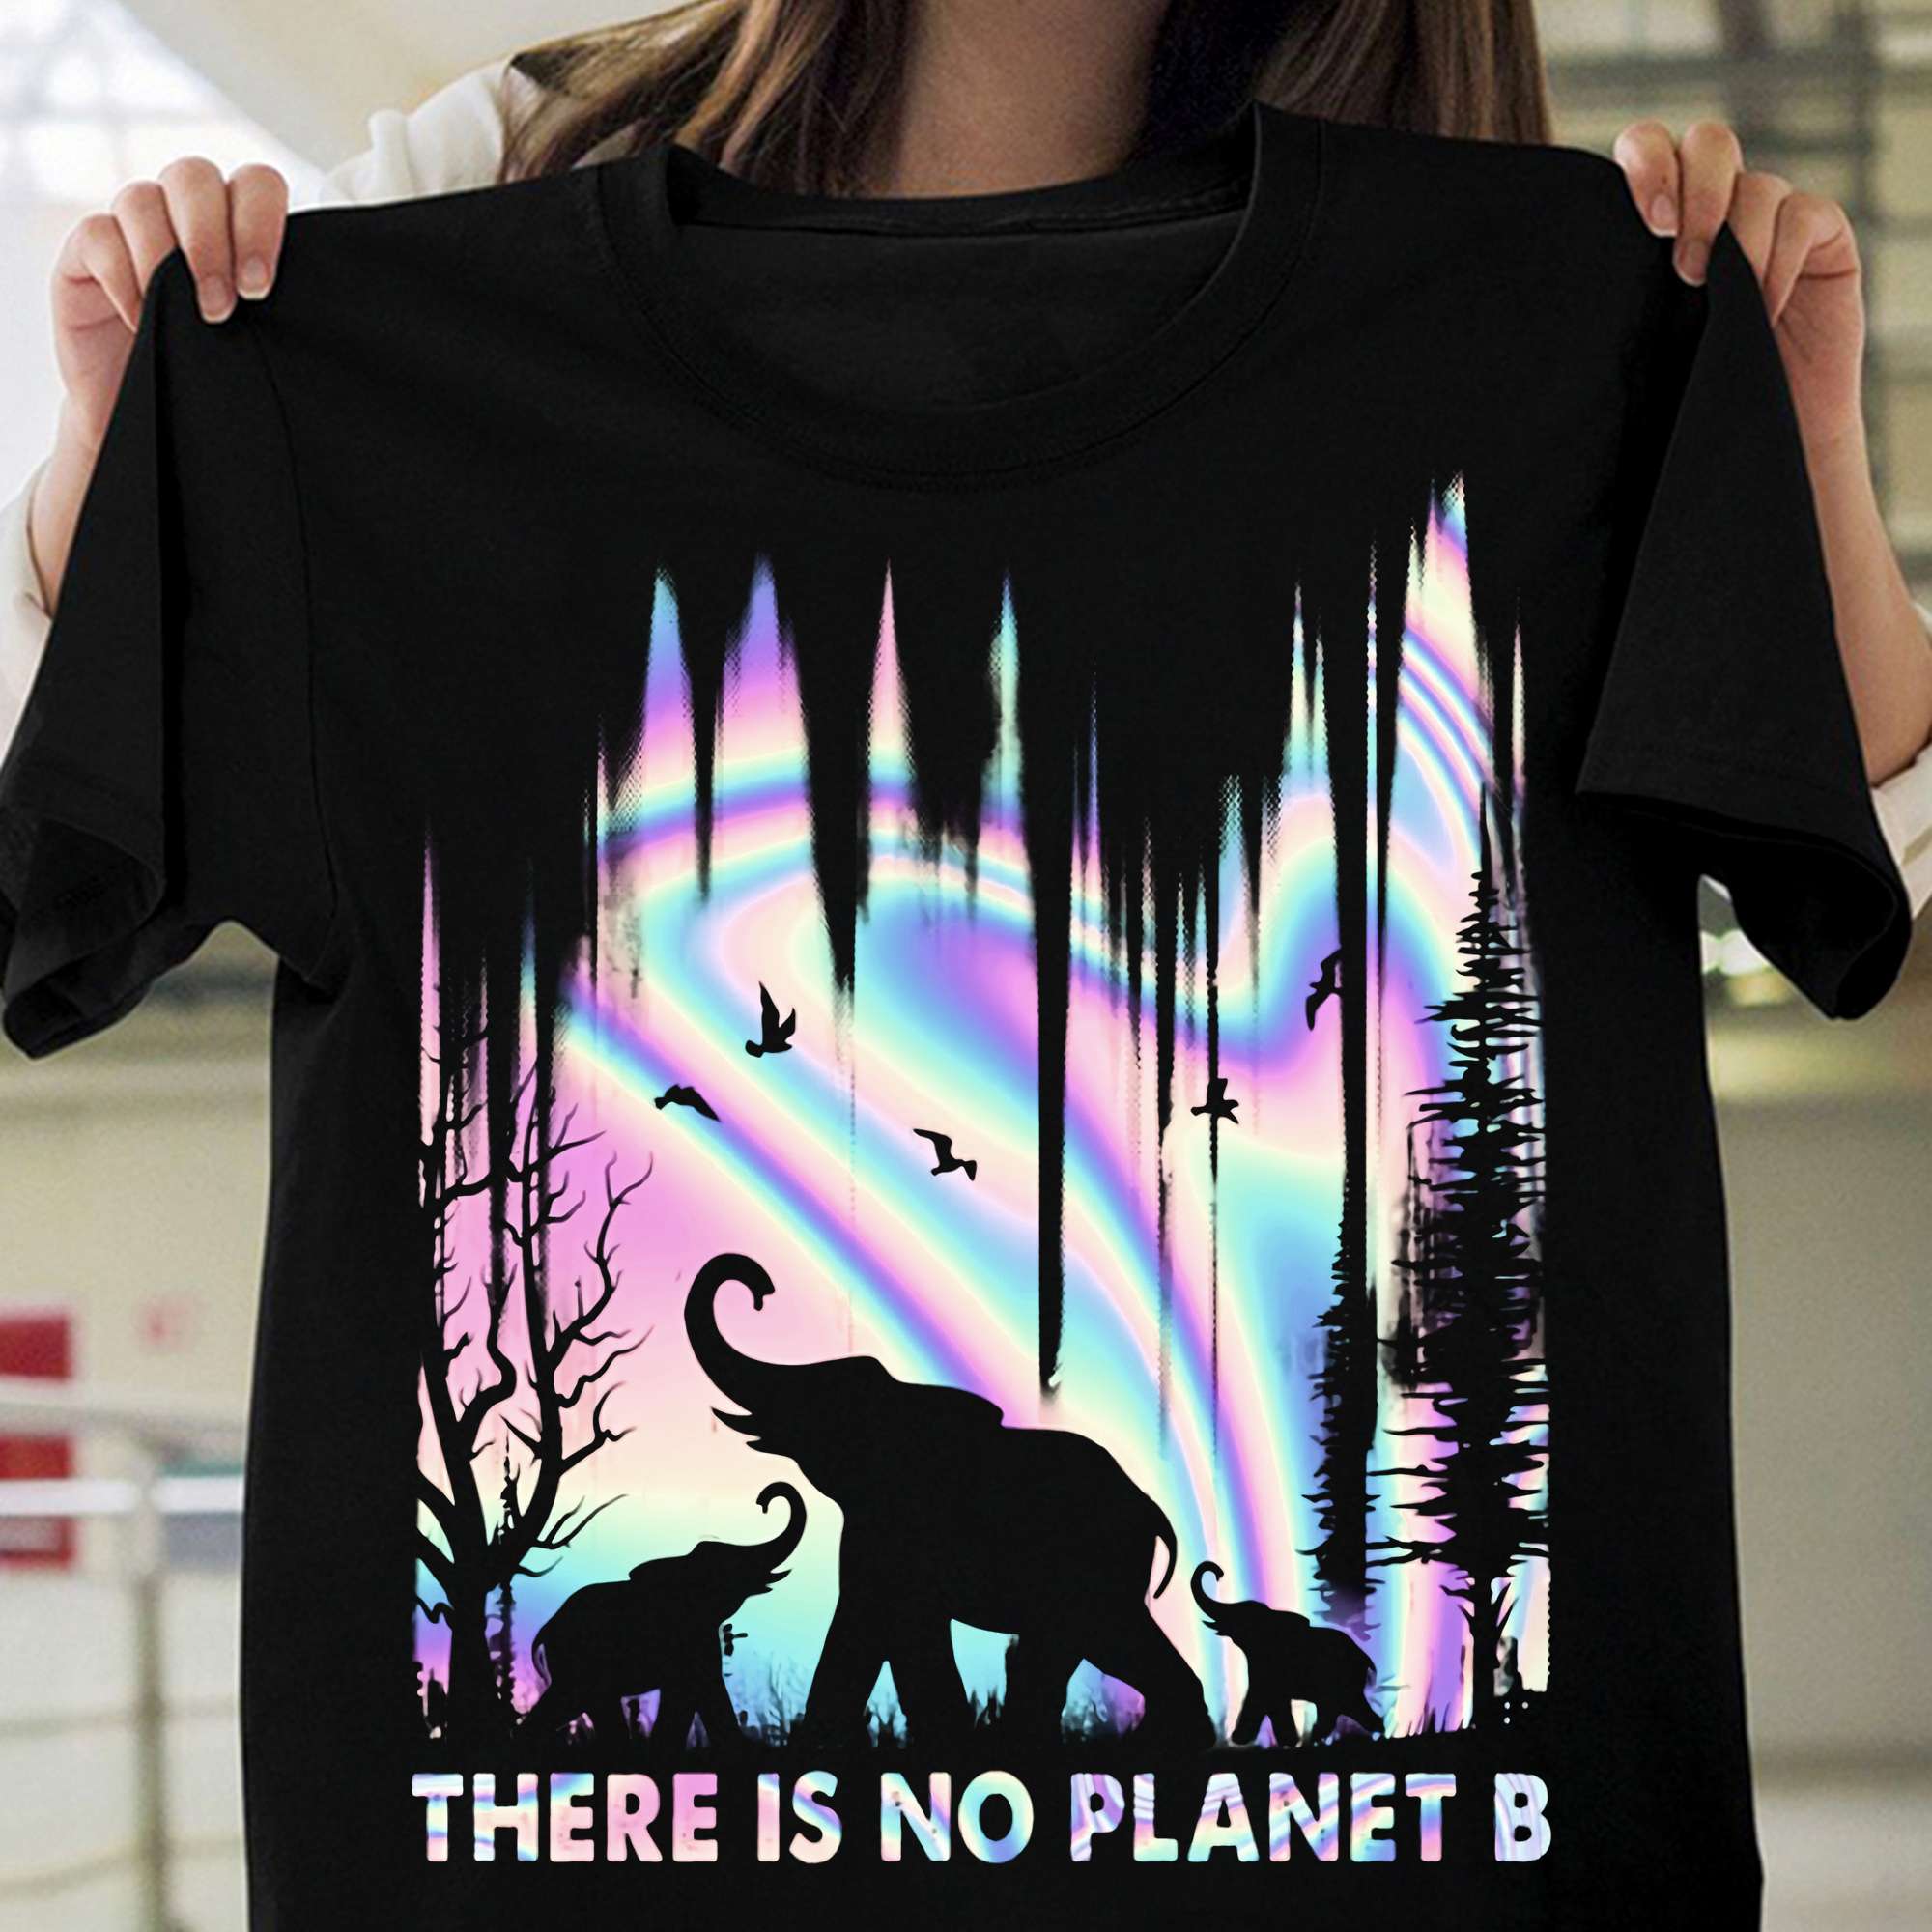 There is no planet B - Save our planet, rescueing elephants